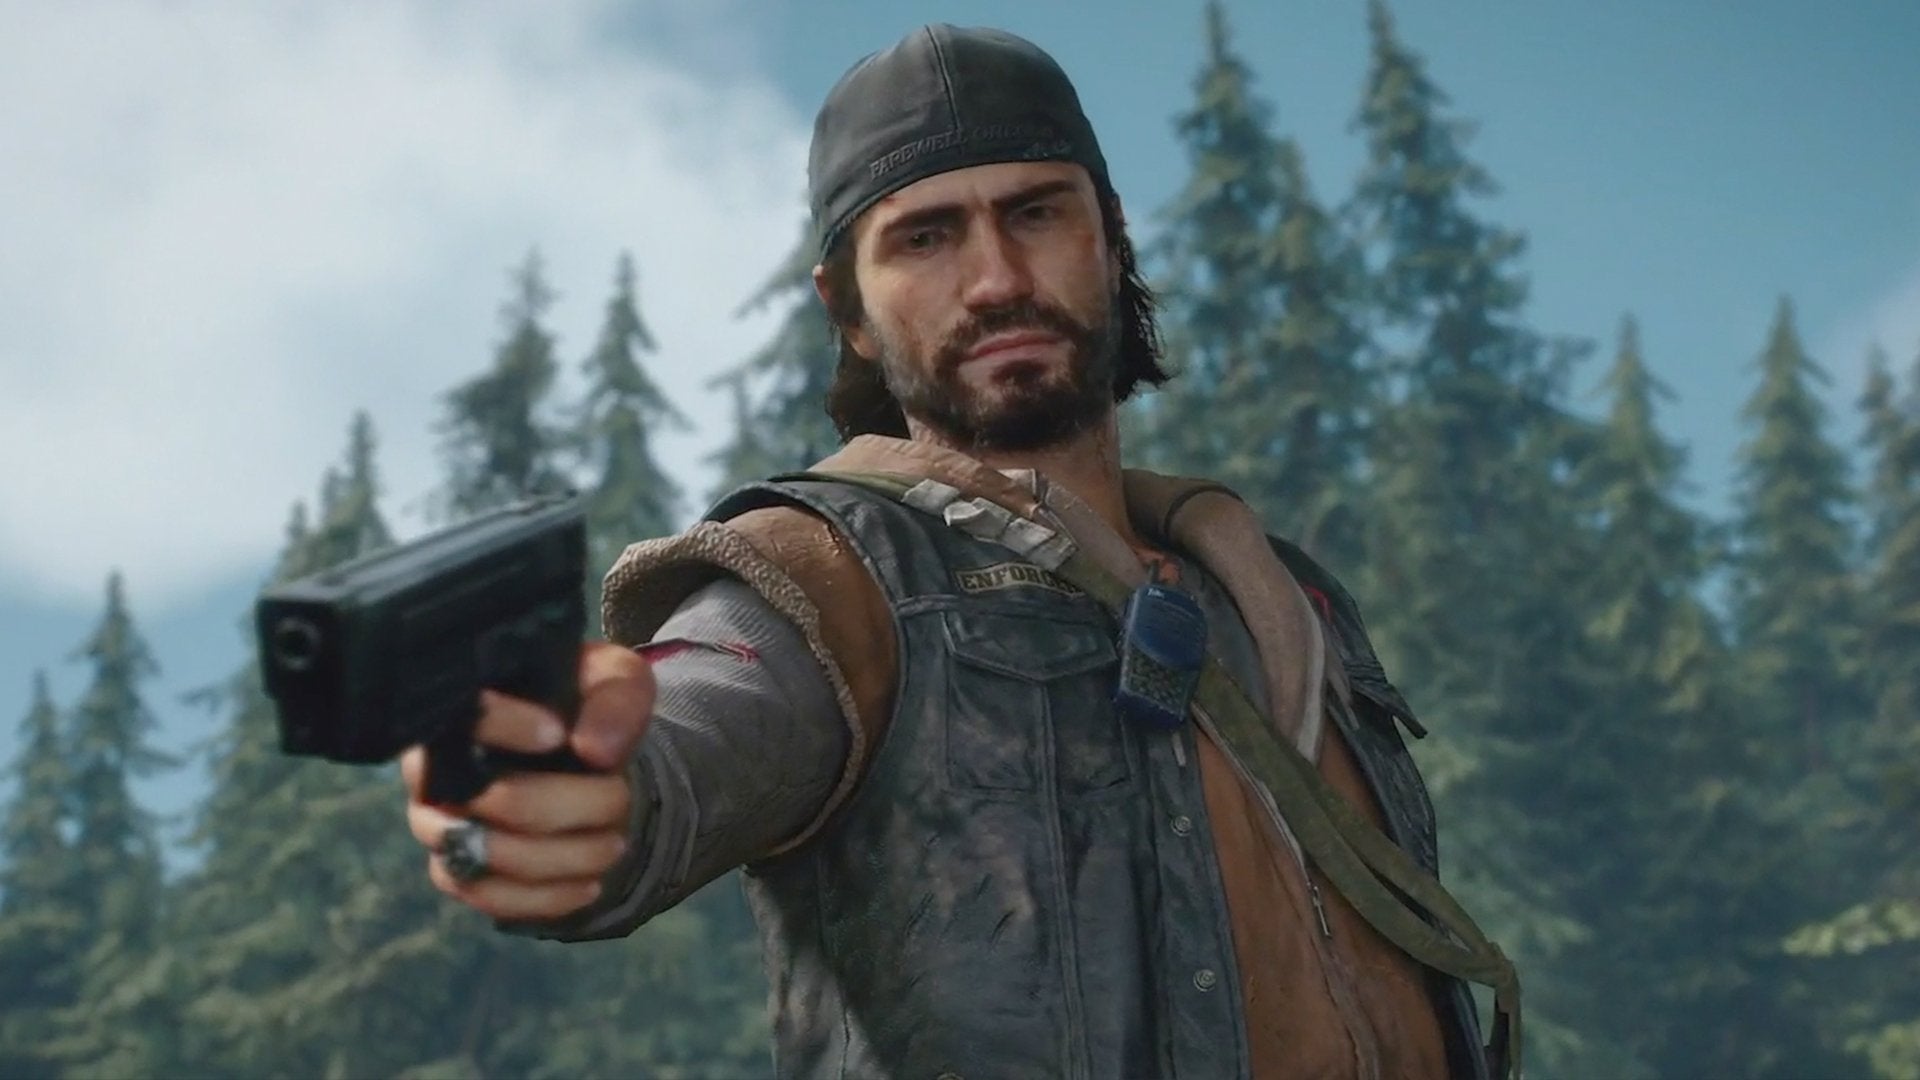 Image for Bend Studio's new IP "builds upon the open-world systems of Days Gone"